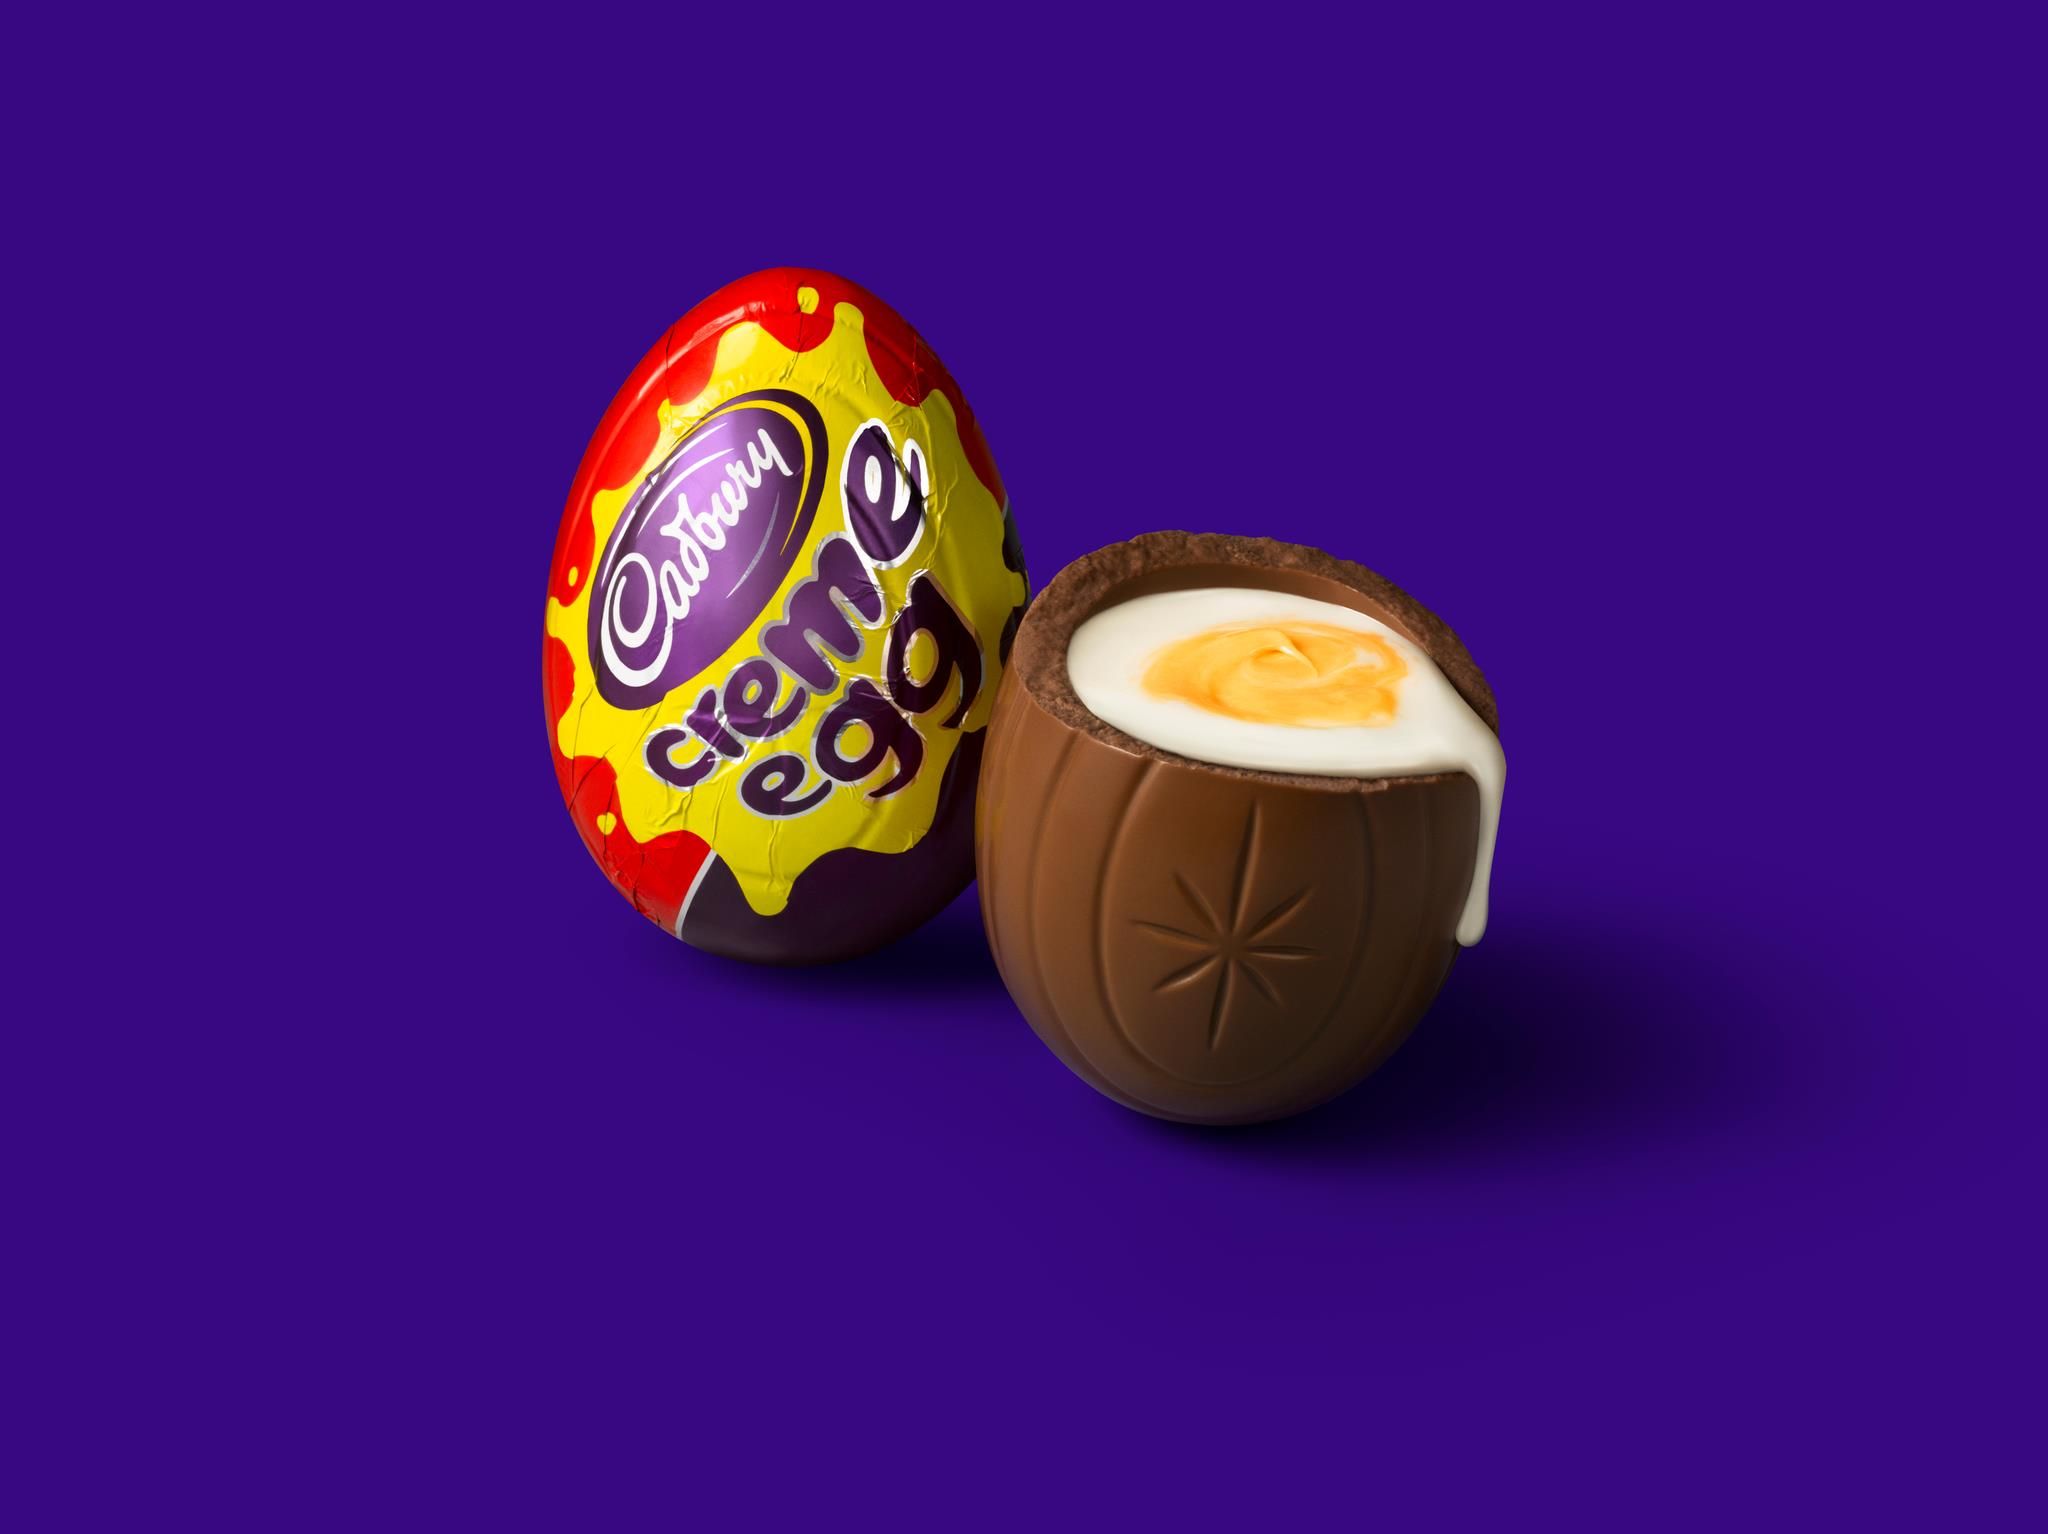 Cadbury Facing Backlash Over "Graphic & Offensive" Easter Video AD